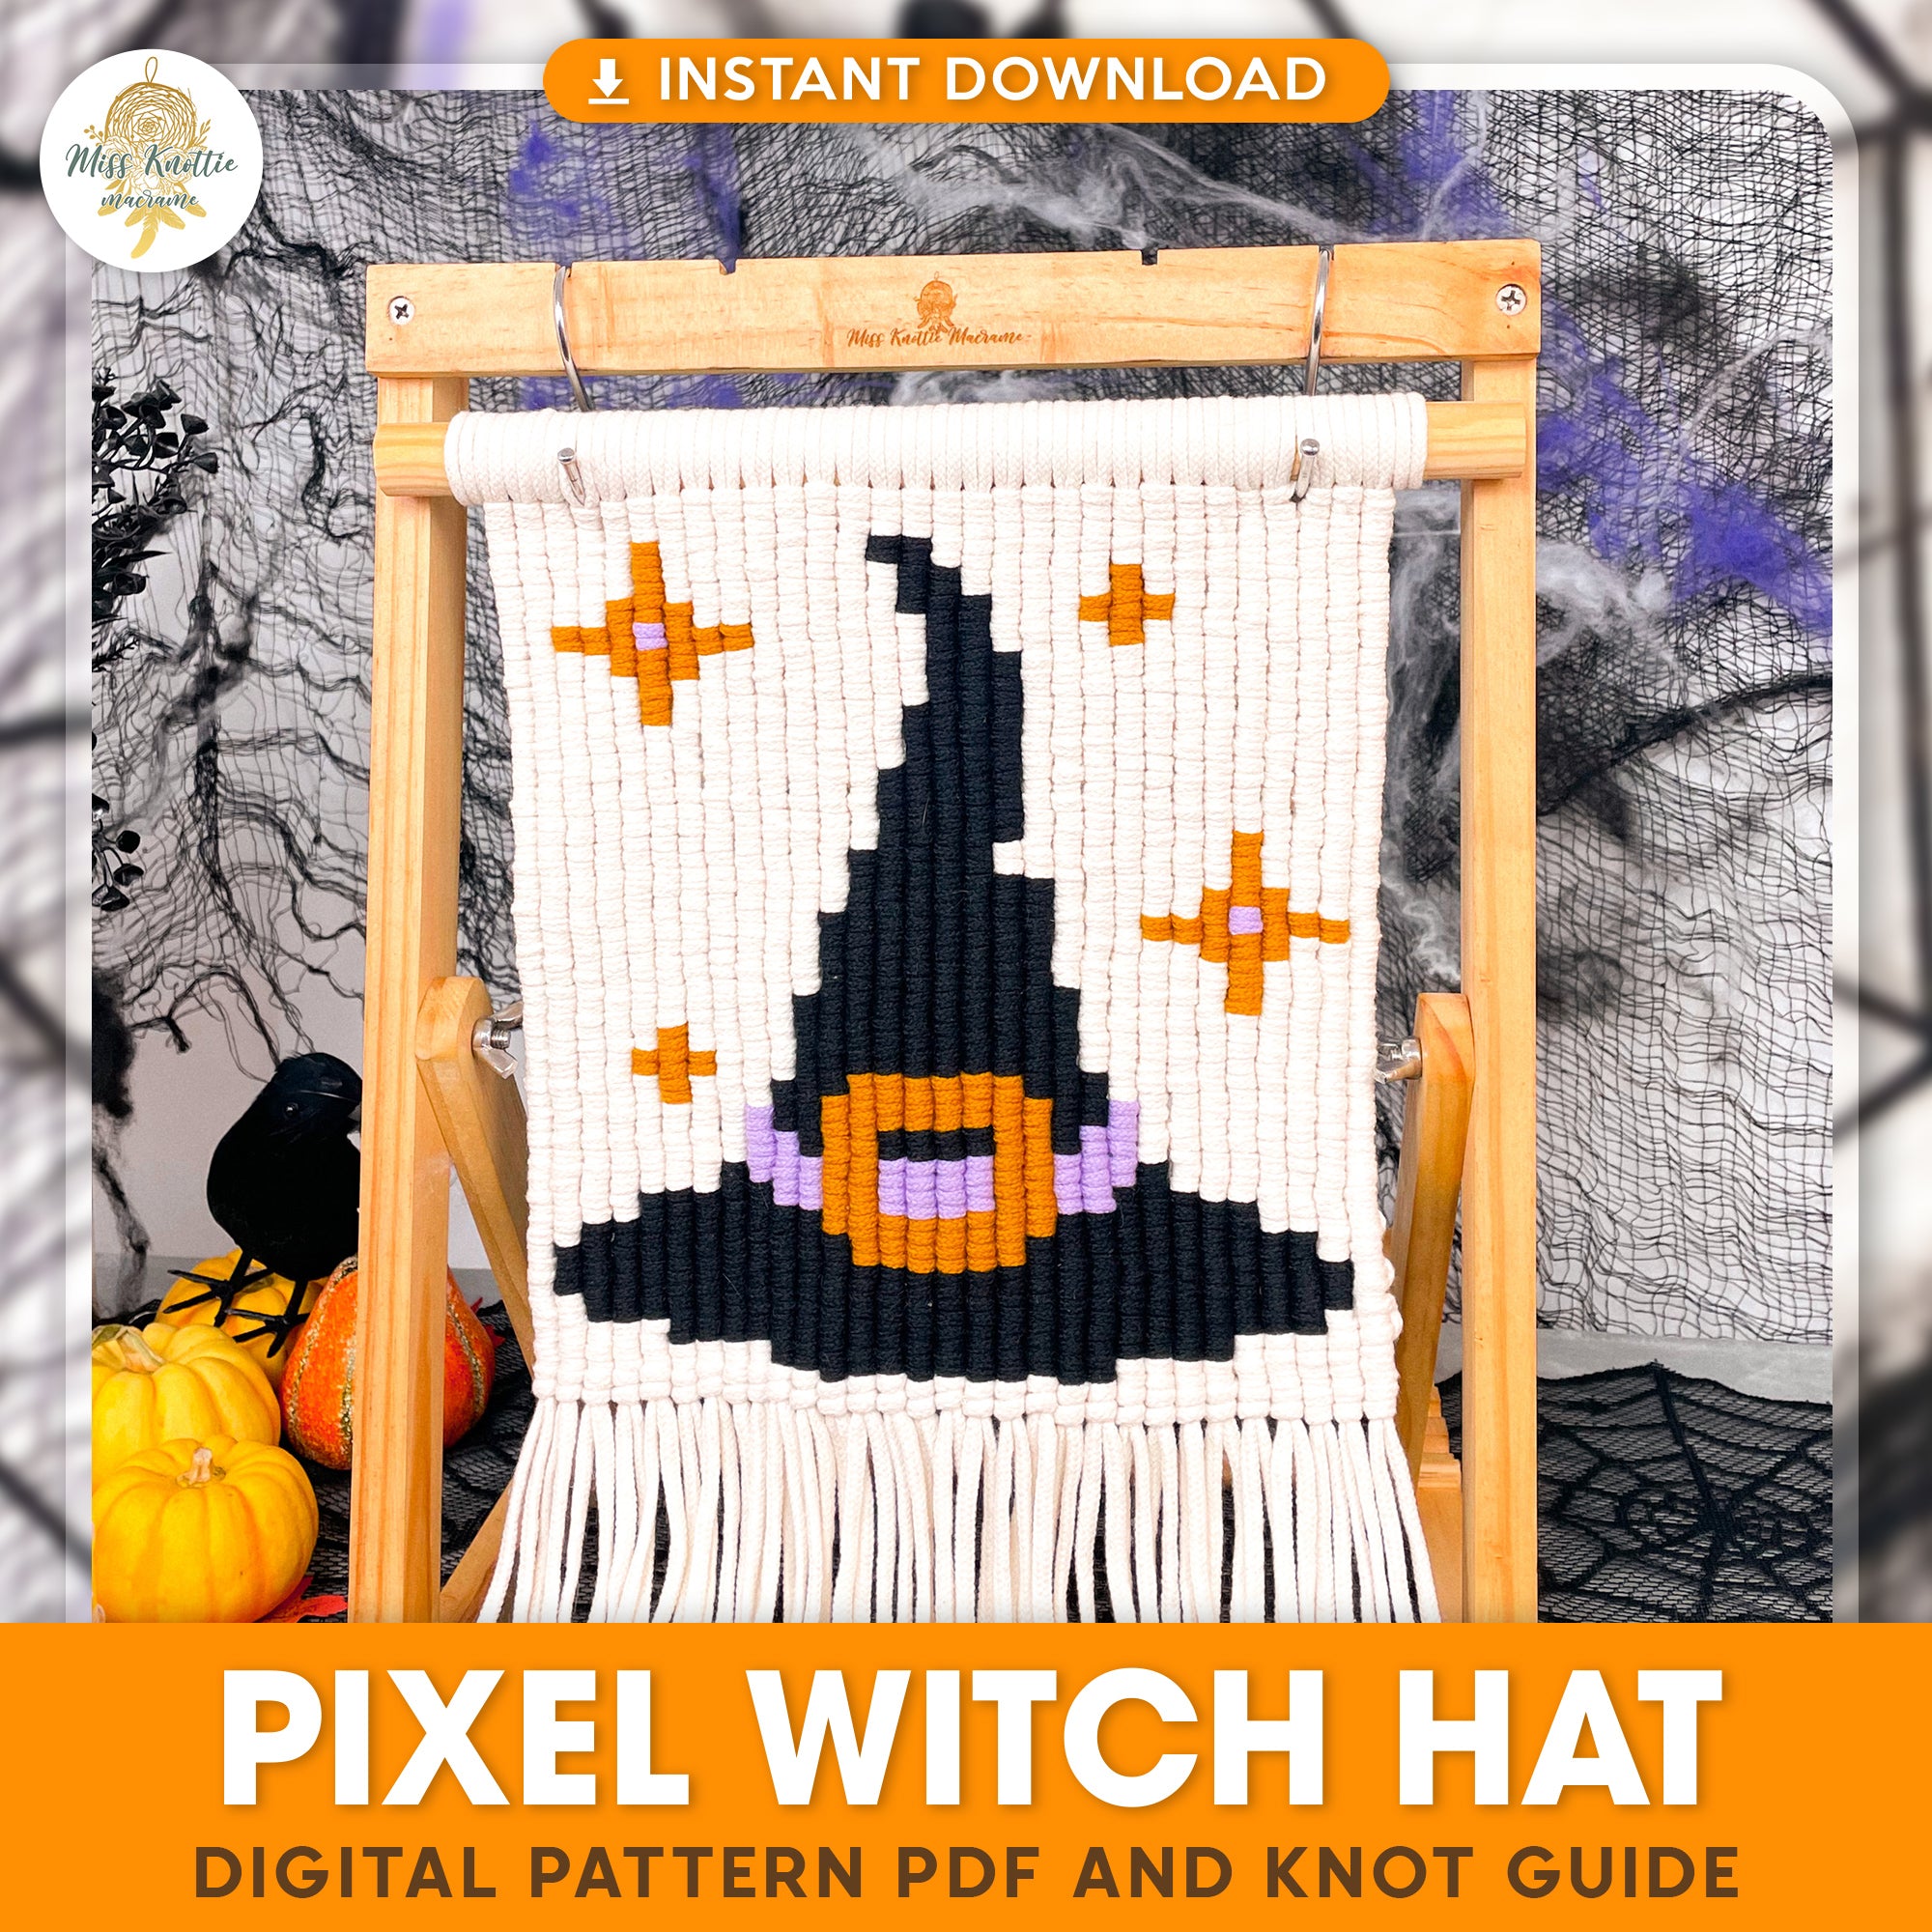 Macrame Pixel Halloween Witch Hat Pattern - Digital PDF and Knot Guide